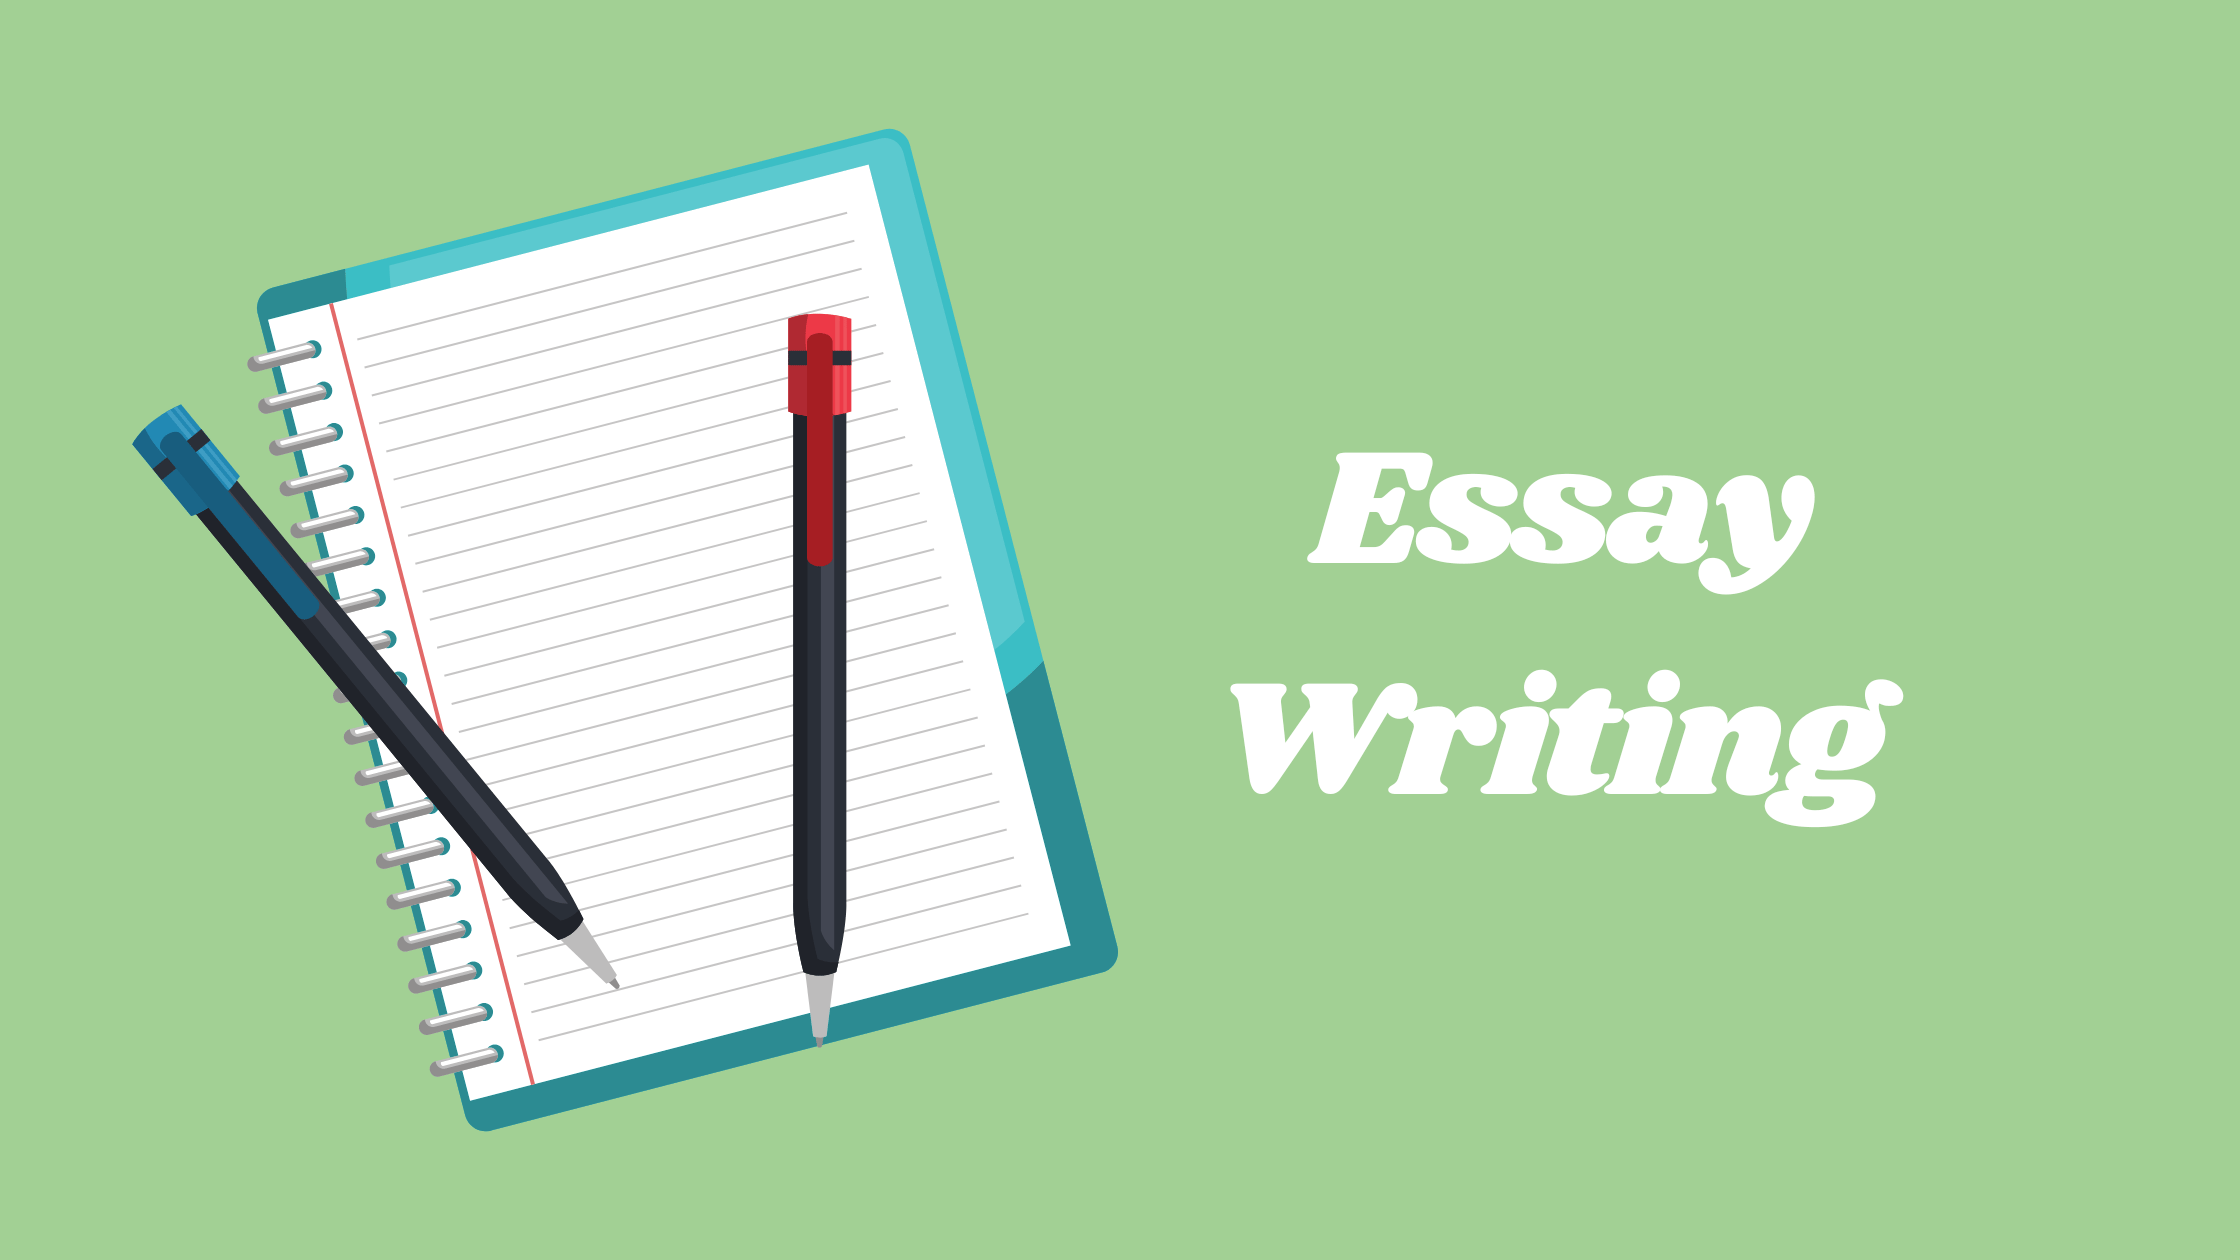 enhancing the coherence and readability of your essay